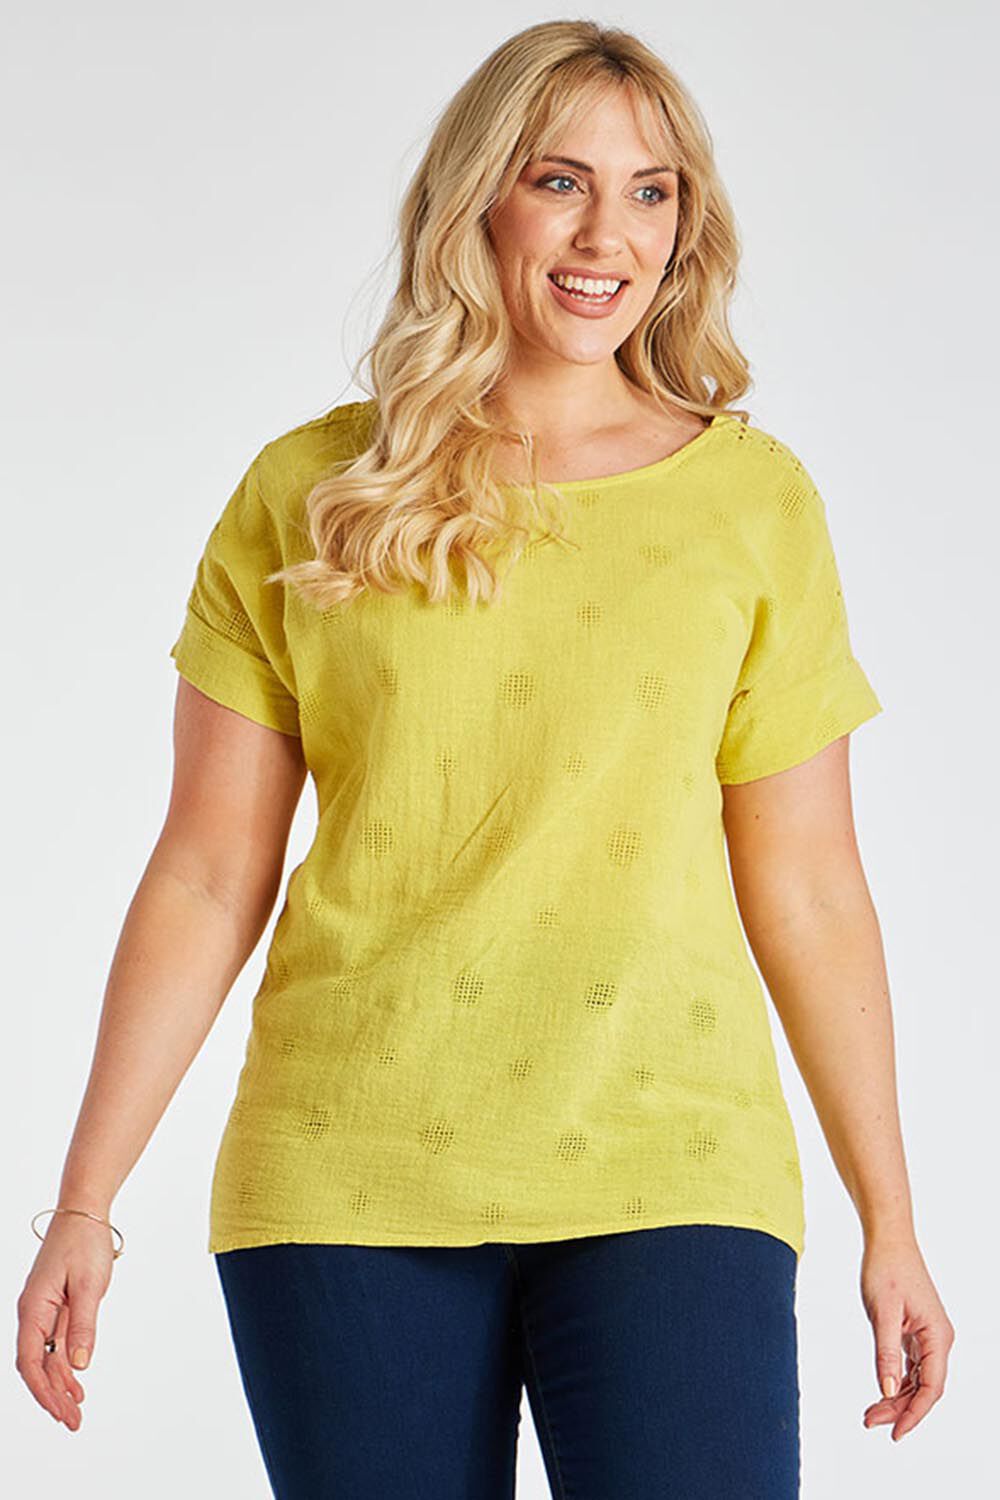 Bonmarche Lime Short Sleeve Textured Linen Look Shell Top, Size: S